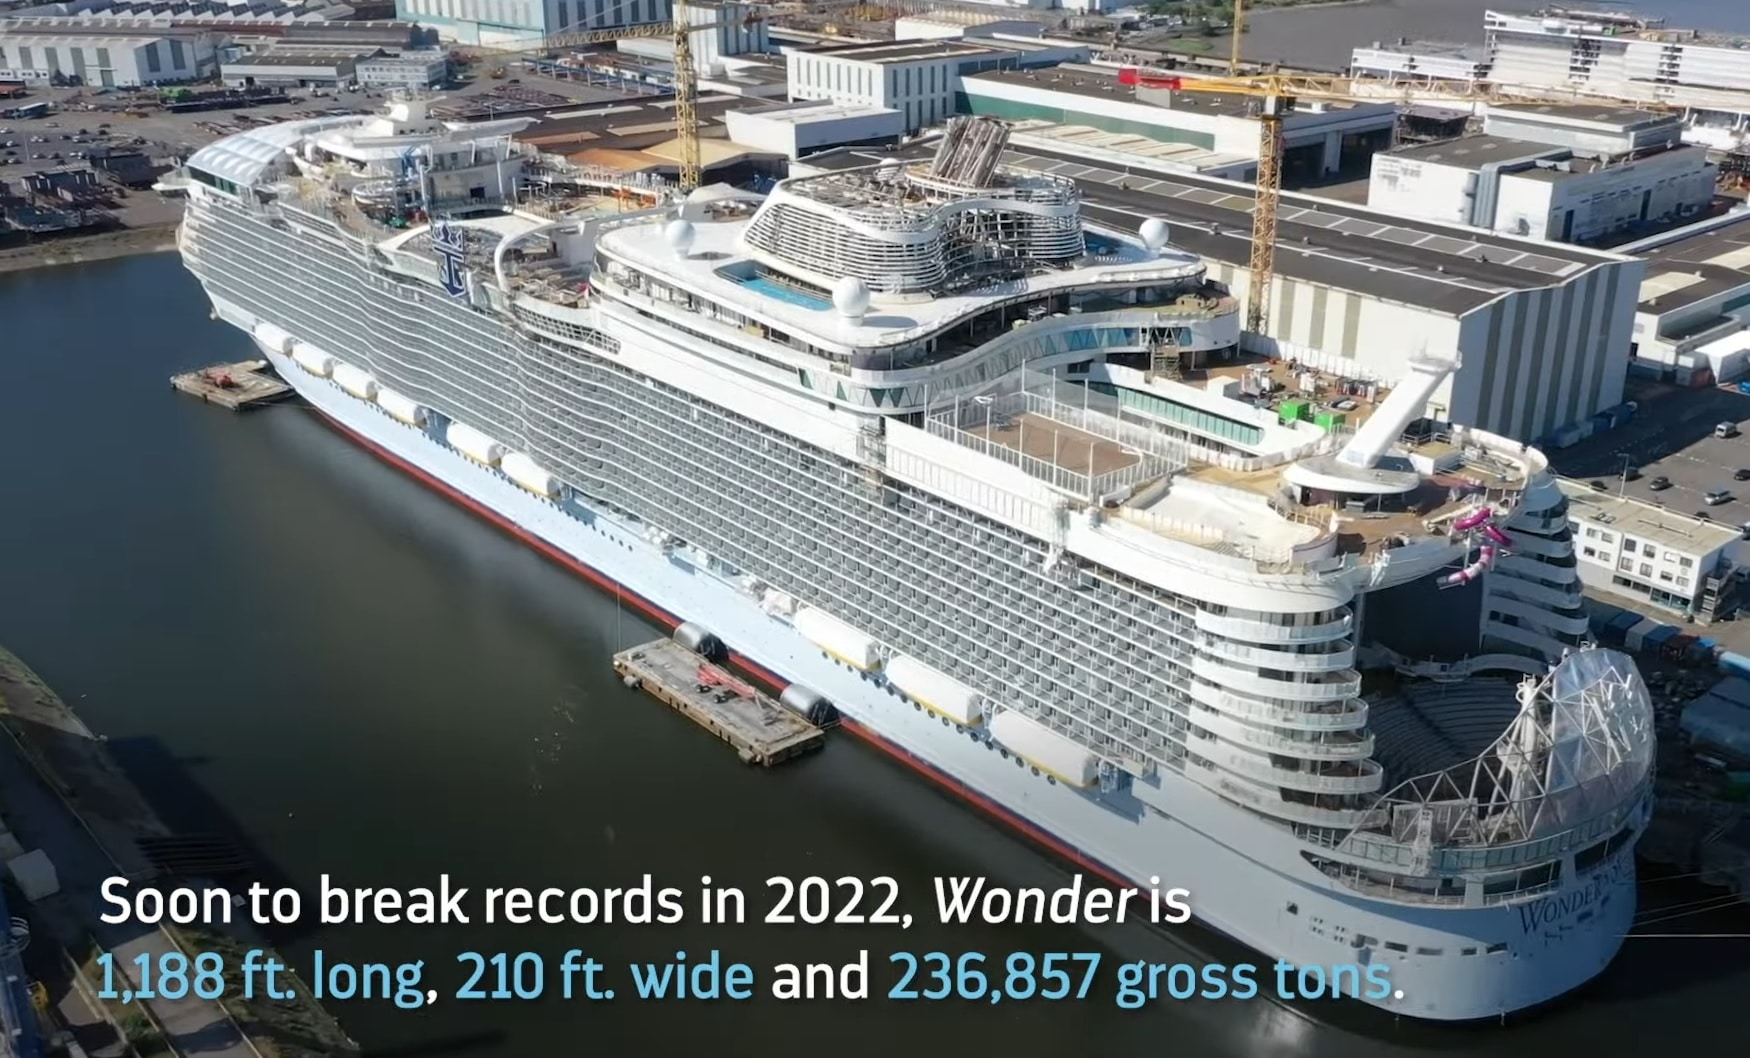 Video Construction Update of the World's Largest Cruise Ship - Travel